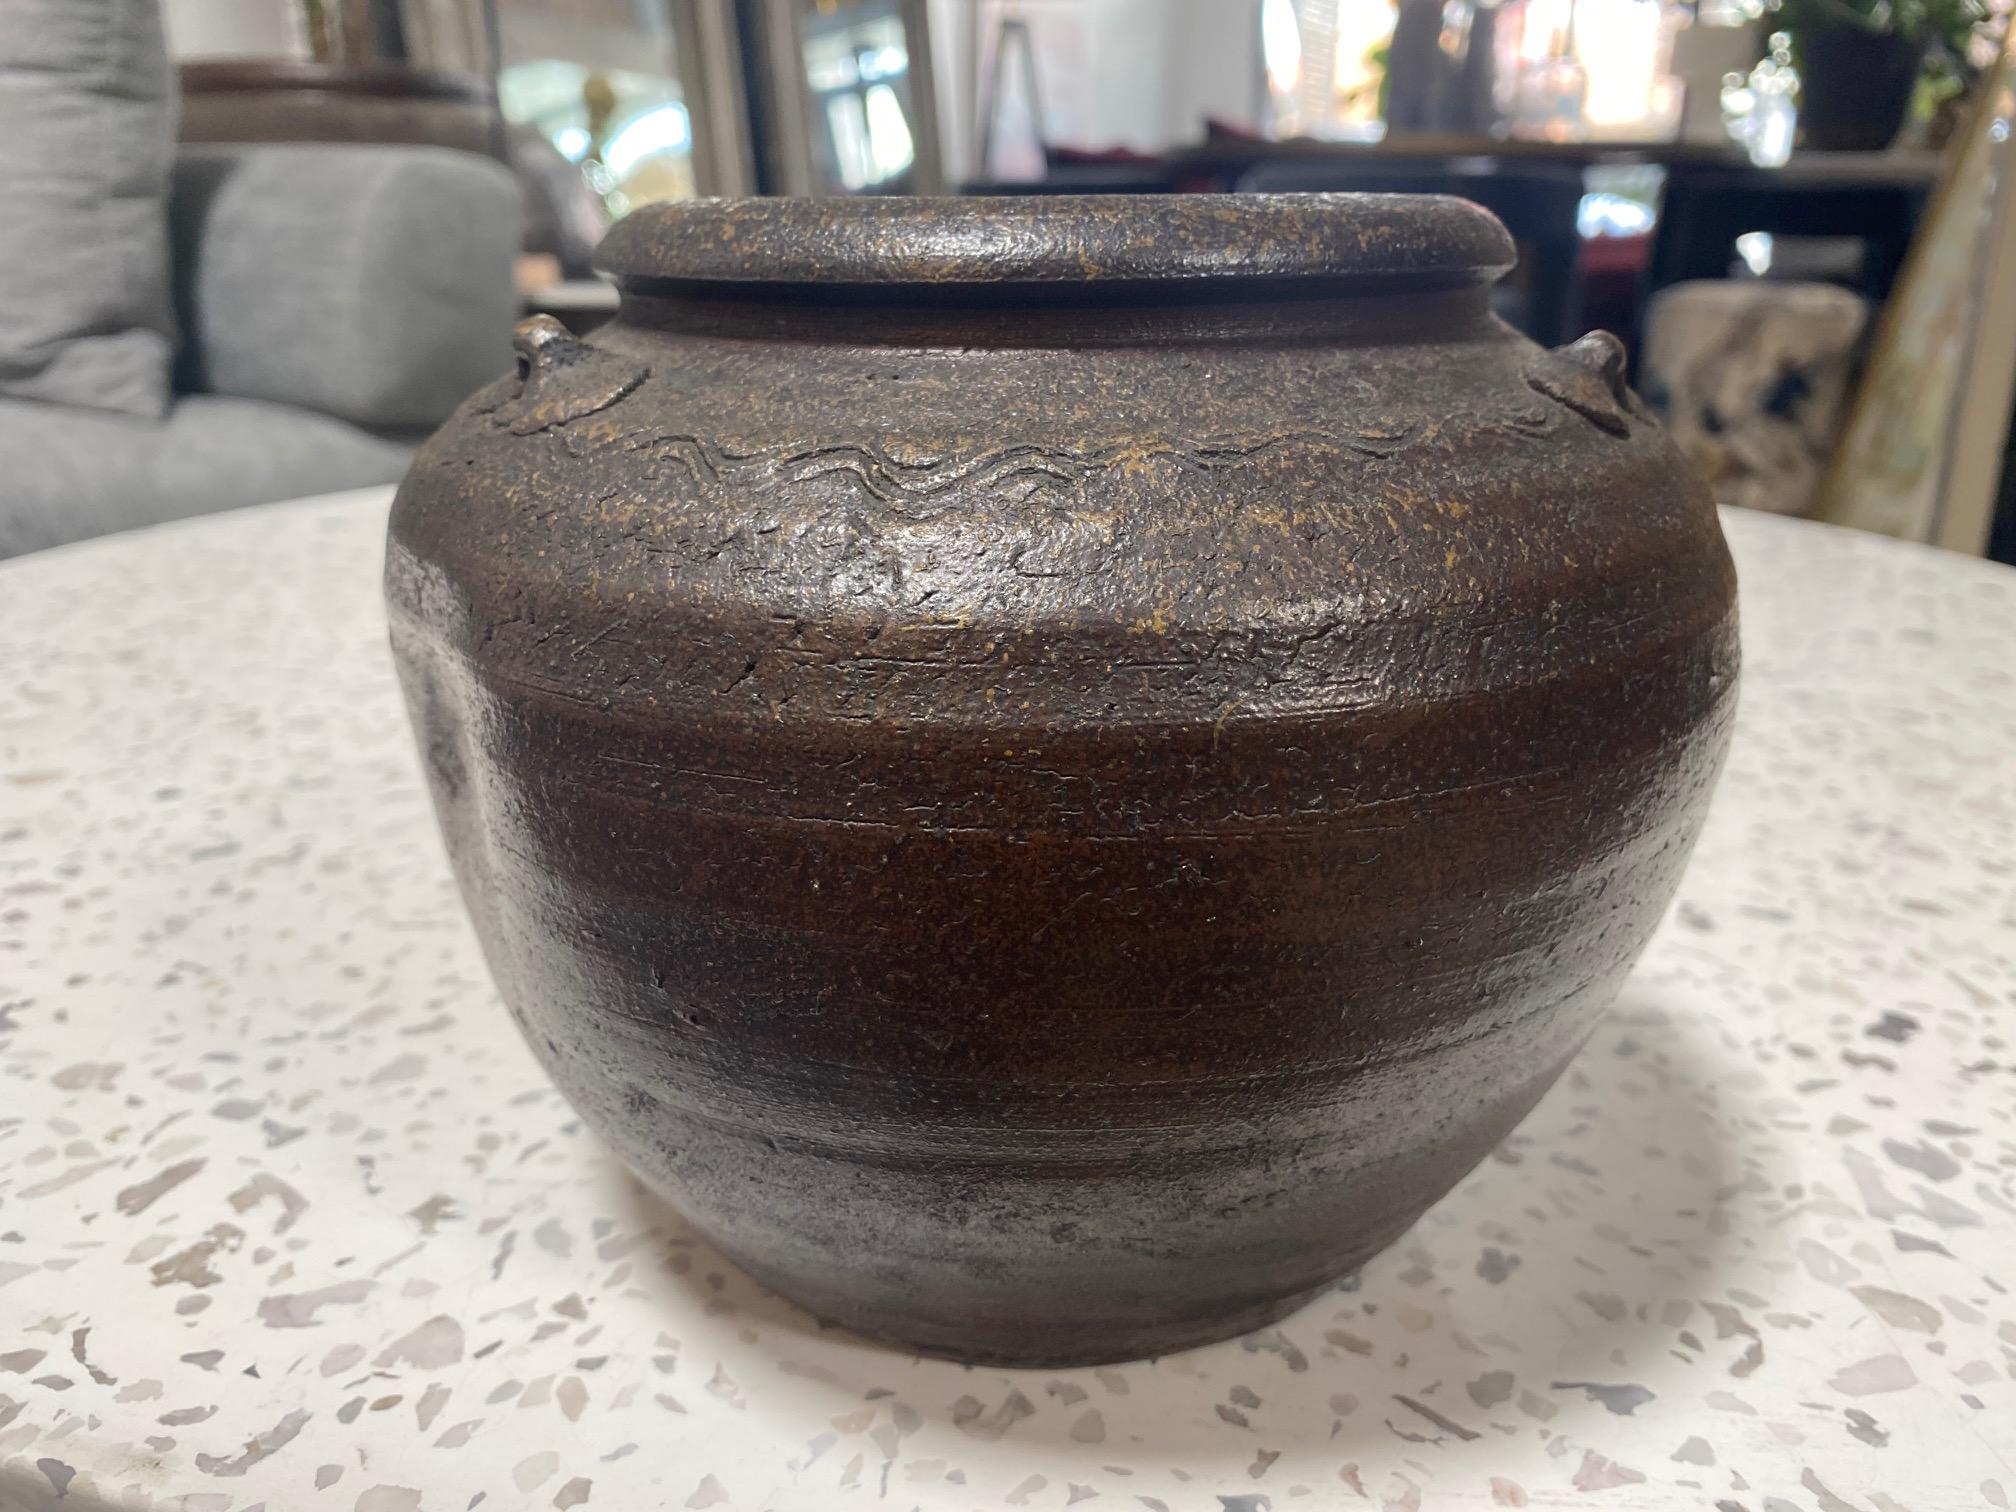 Kaneshige Toyo National Treasure Signed Japanese Bizen Pottery Tsubo Jar Vase In Good Condition For Sale In Studio City, CA